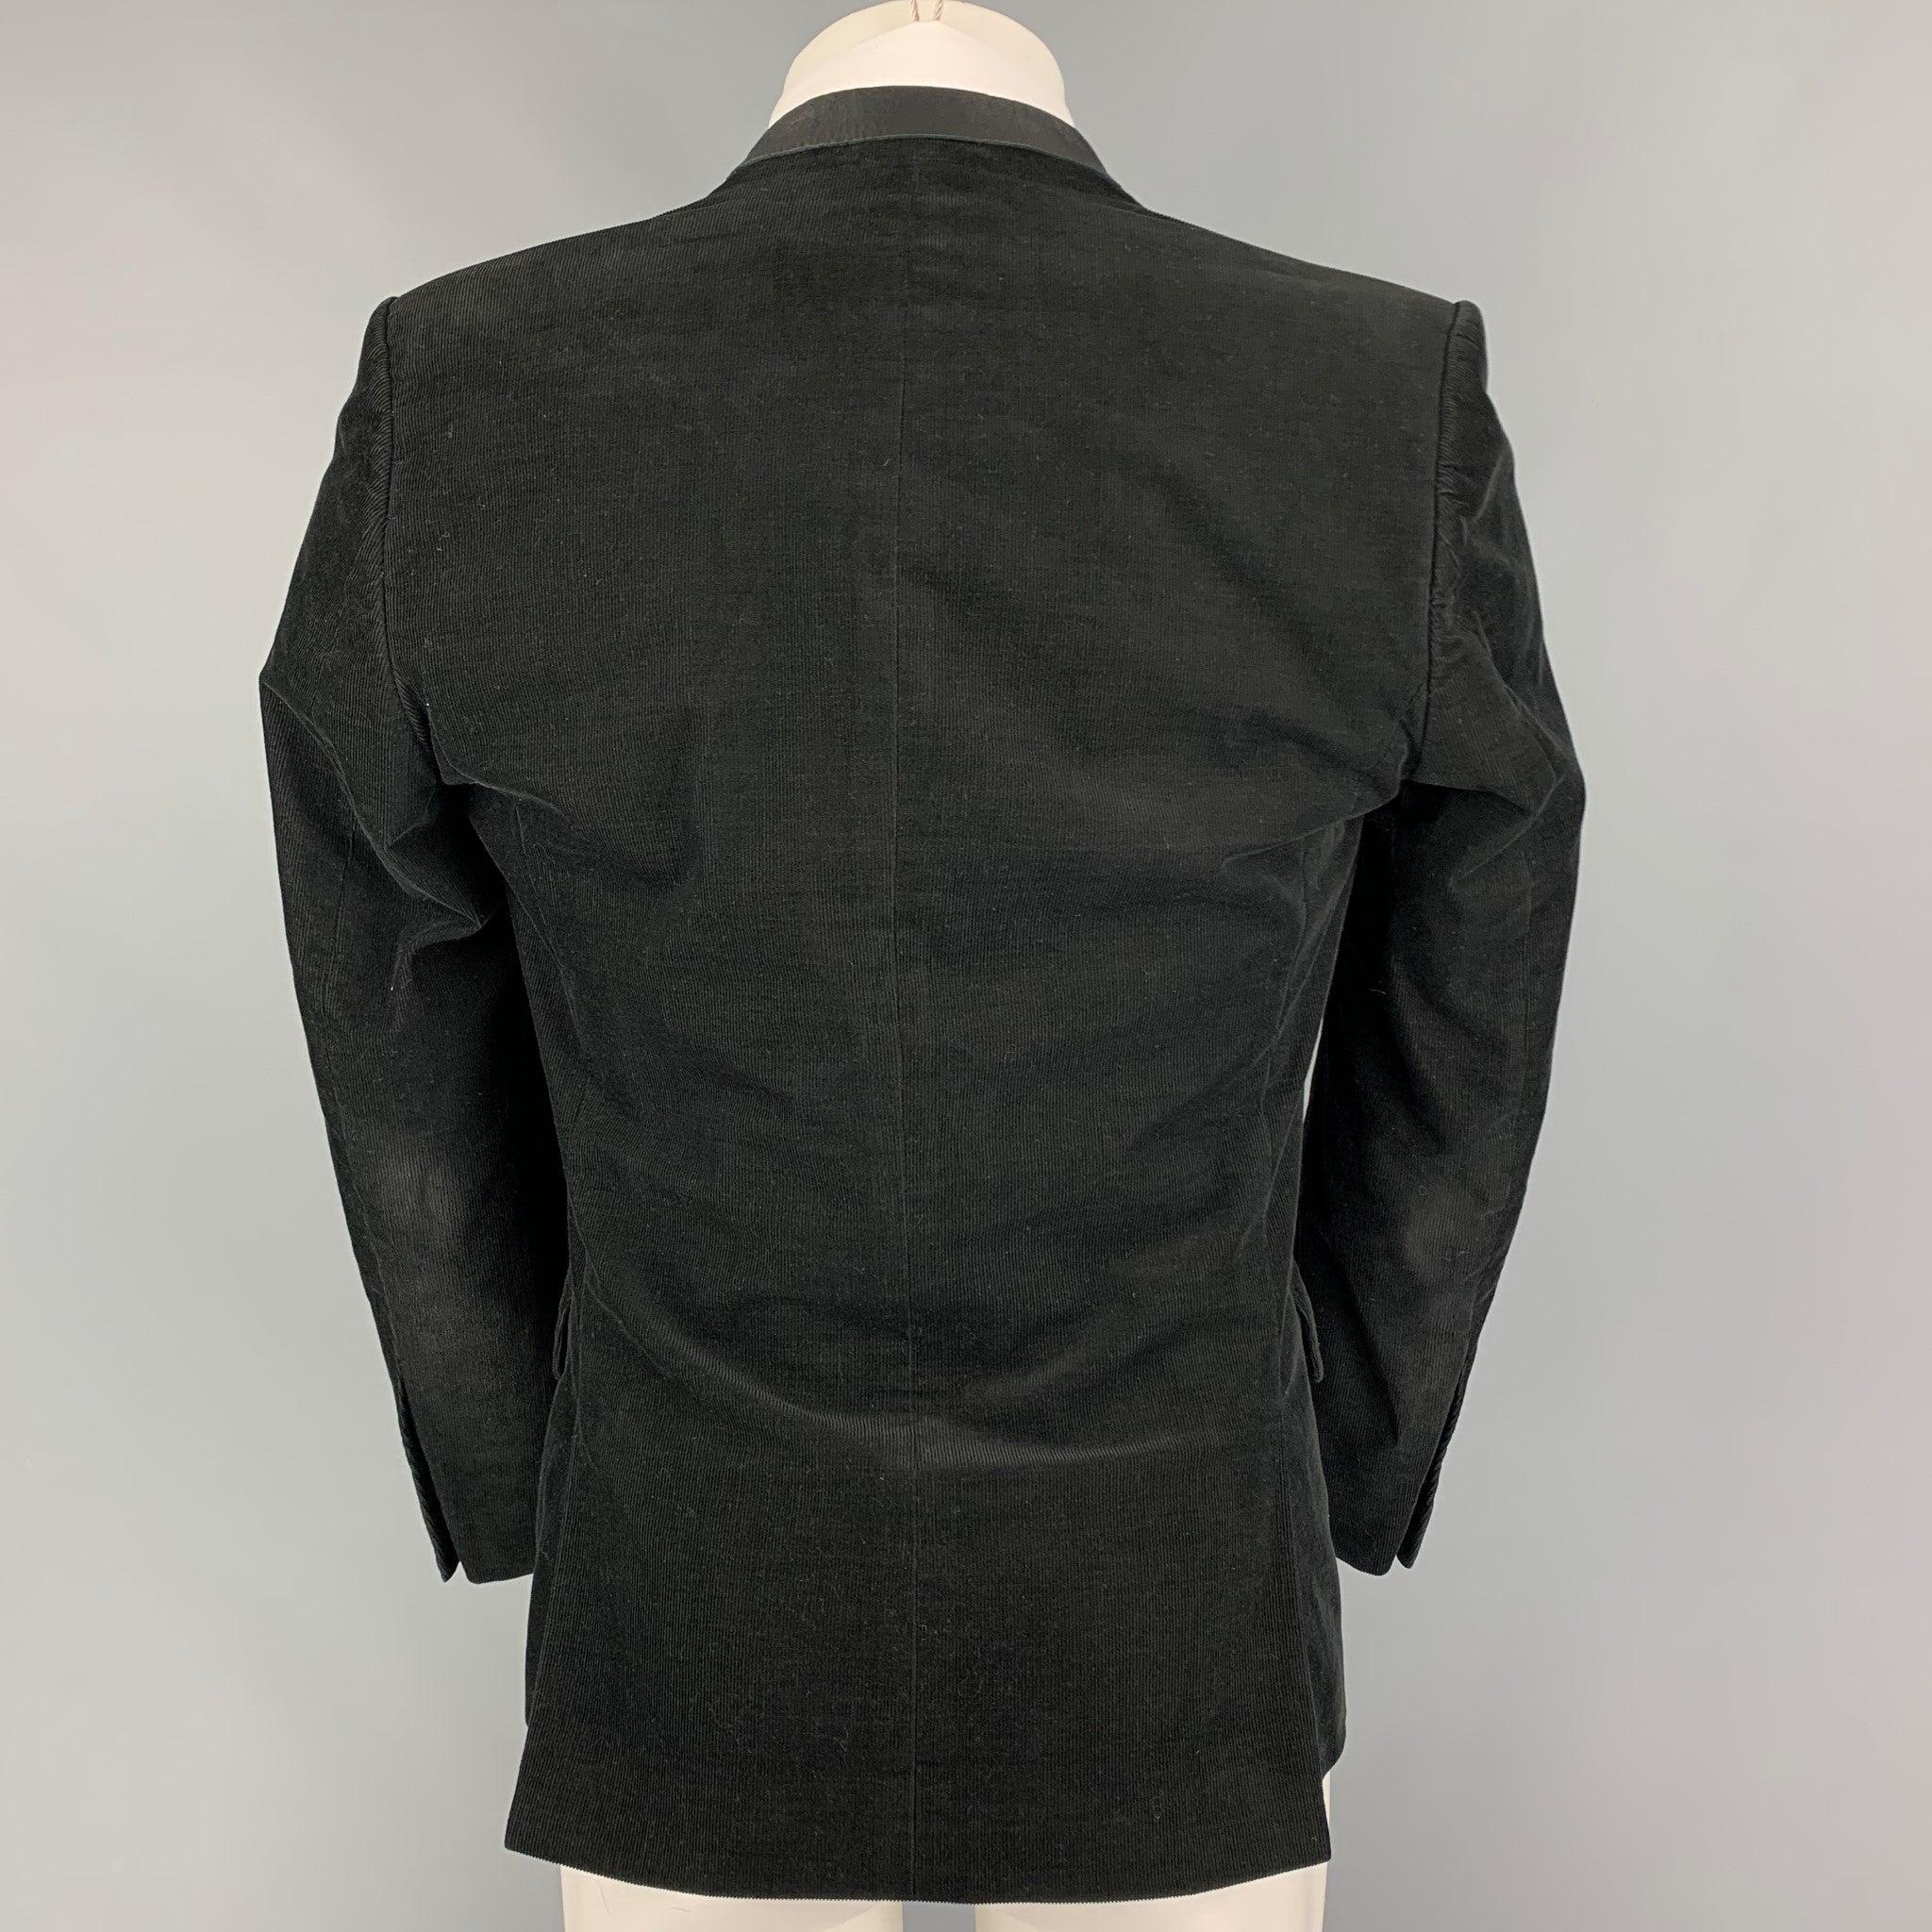 THE KOOPLES Size 36 Black Corduroy Cotton Sport Coat In Good Condition For Sale In San Francisco, CA